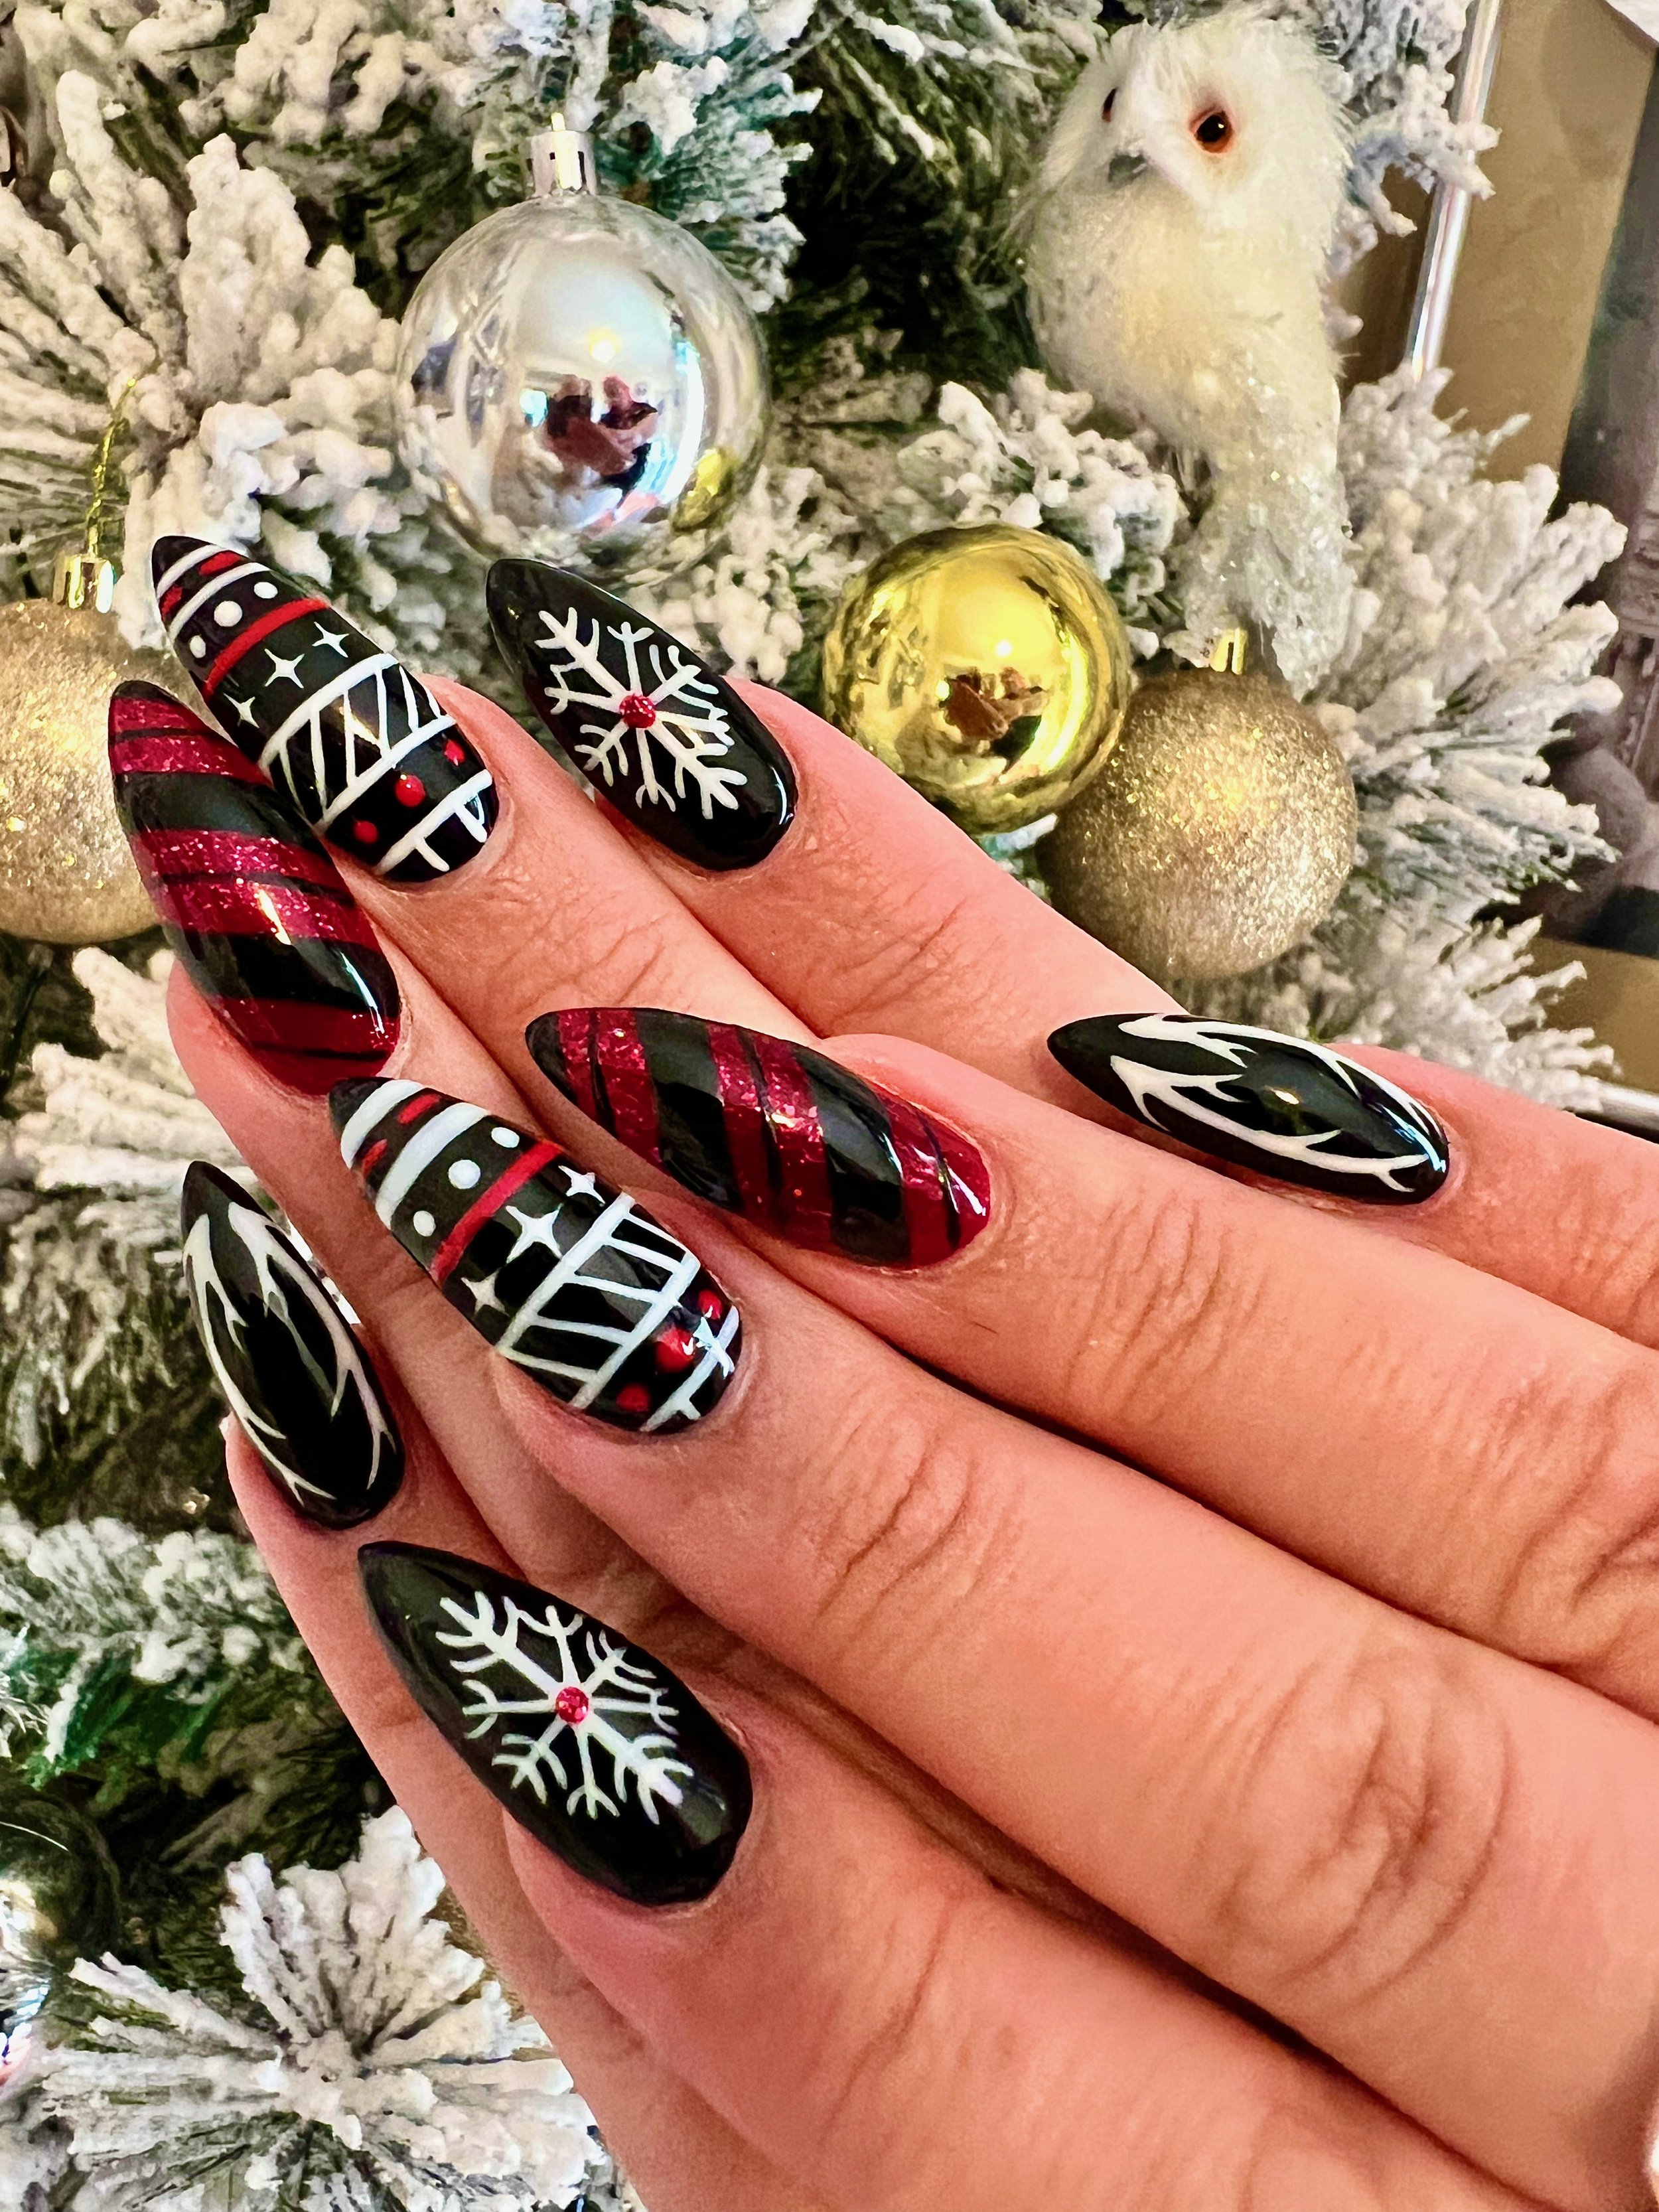 77 Outstanding Christmas Nail Designs to Celebrate This Year | Stylish  Belles | Shiny nails designs, Red christmas nails, Winter nails acrylic